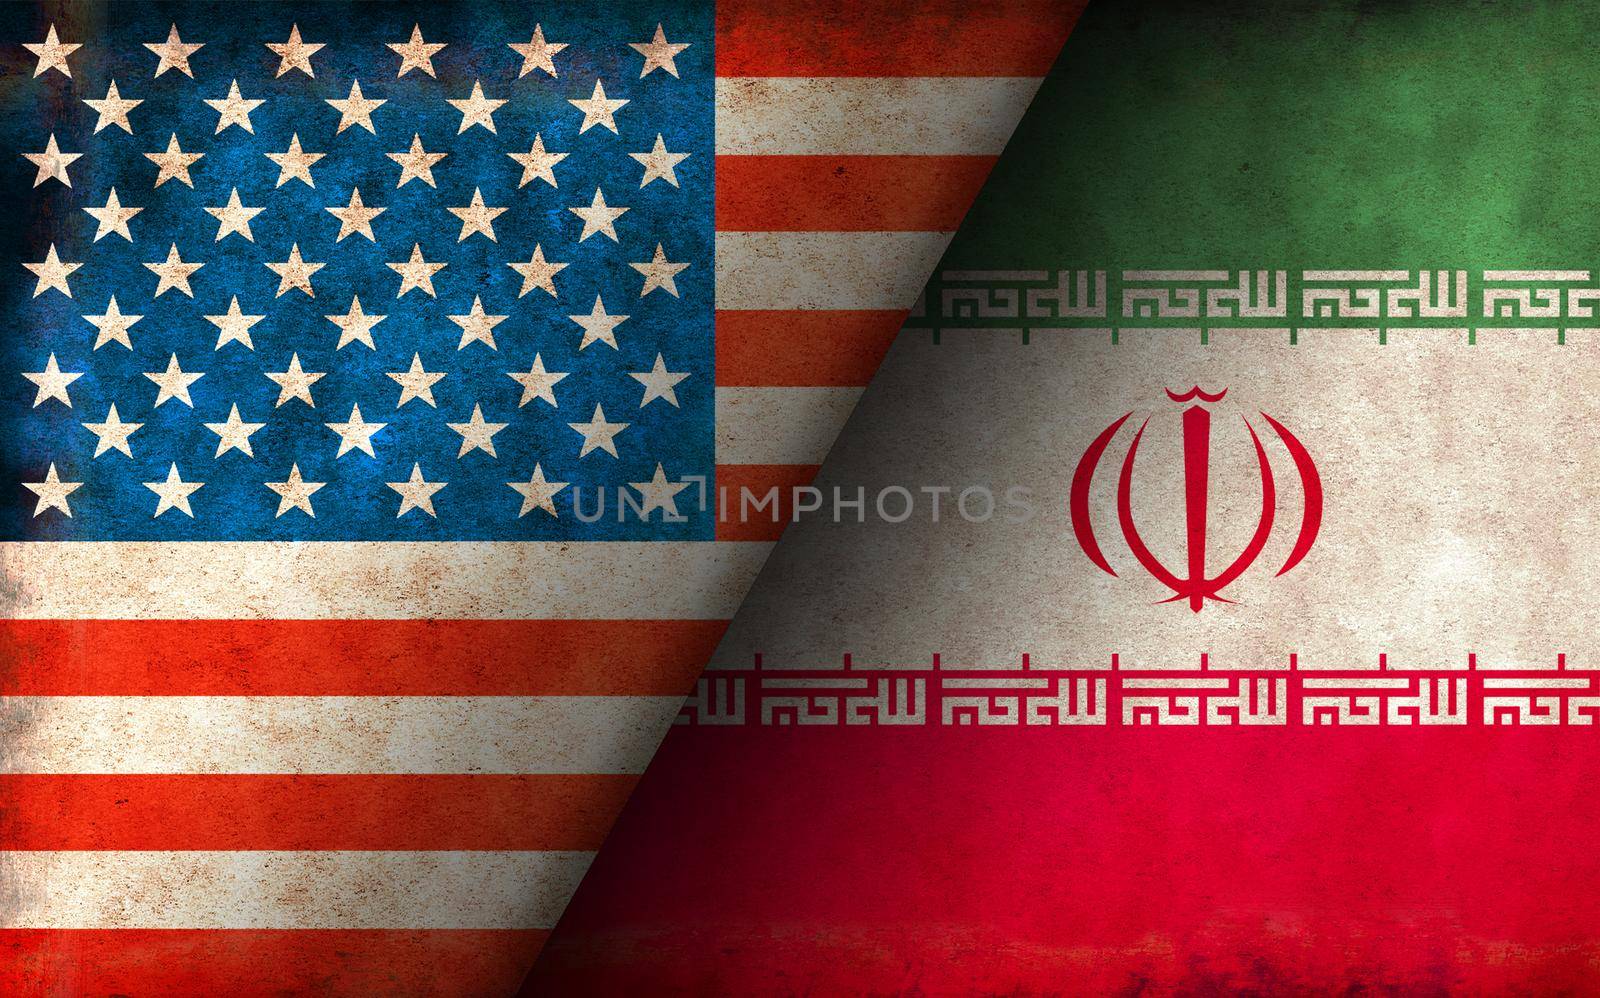 Grunge country flag illustration / USA vs Iran (Political or economic conflict)